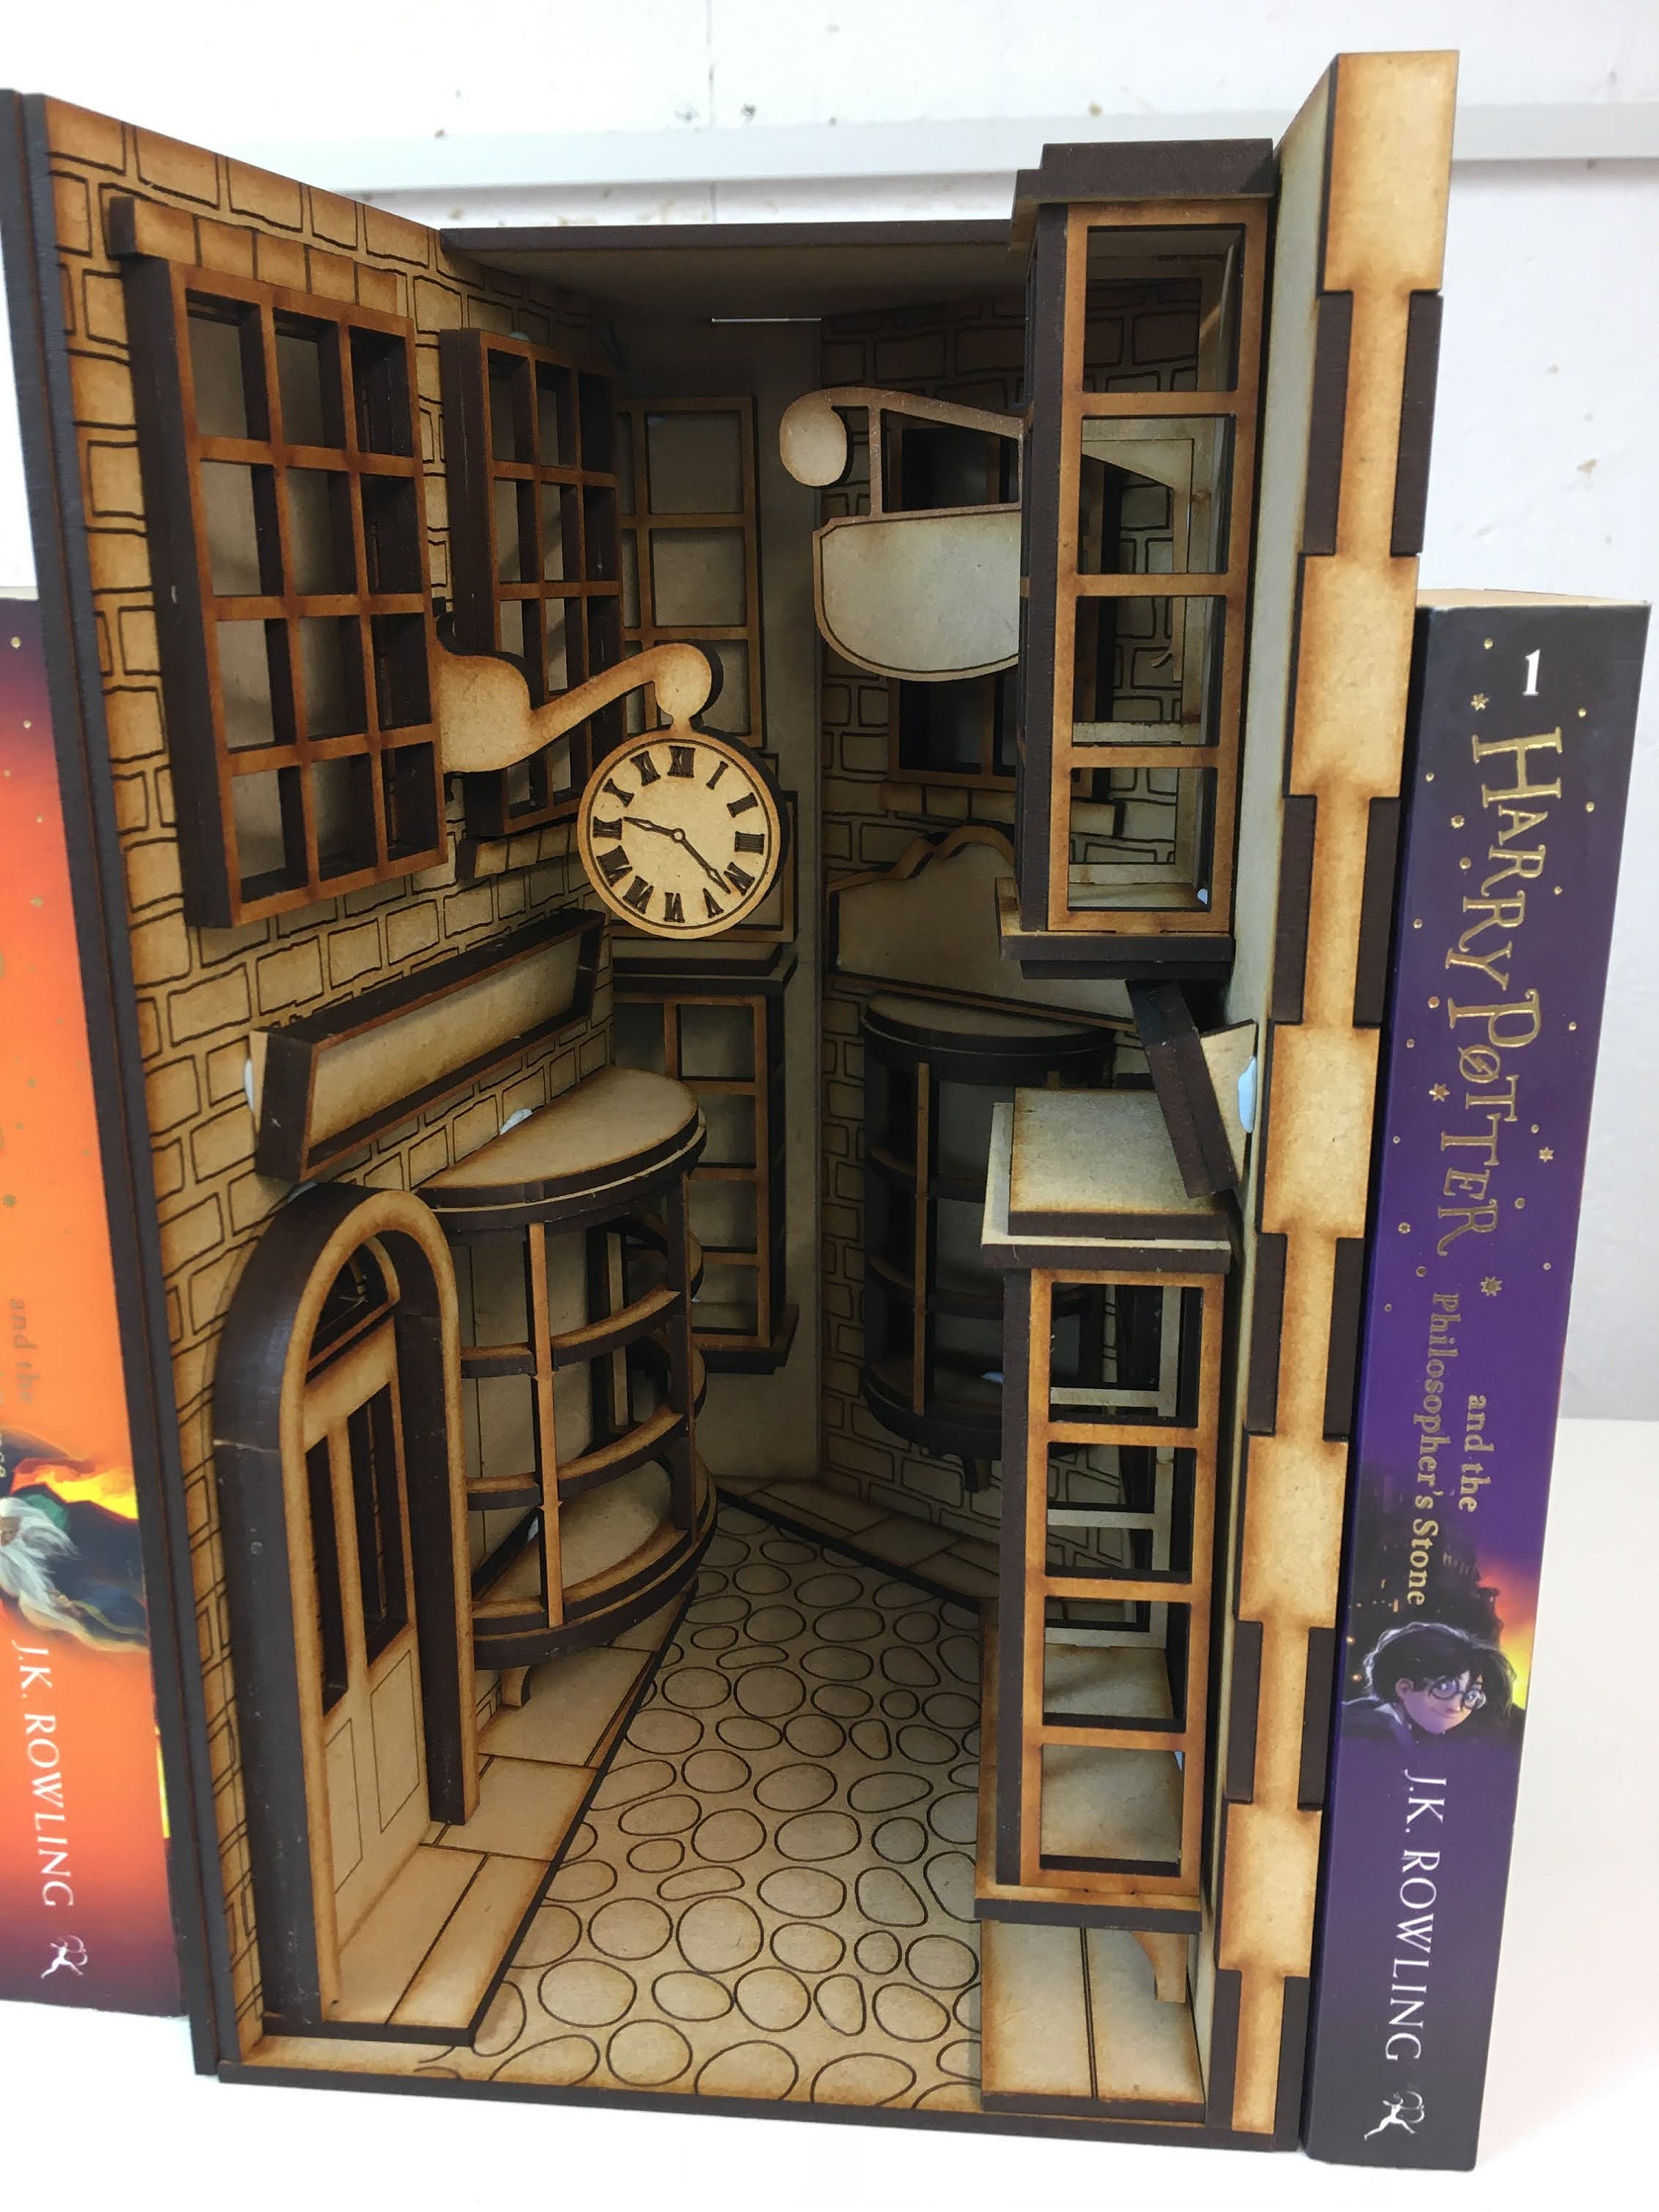 Ron's Magic Mystery Alley Book Nook Shelf Insert Diorama Collectable -   Norway